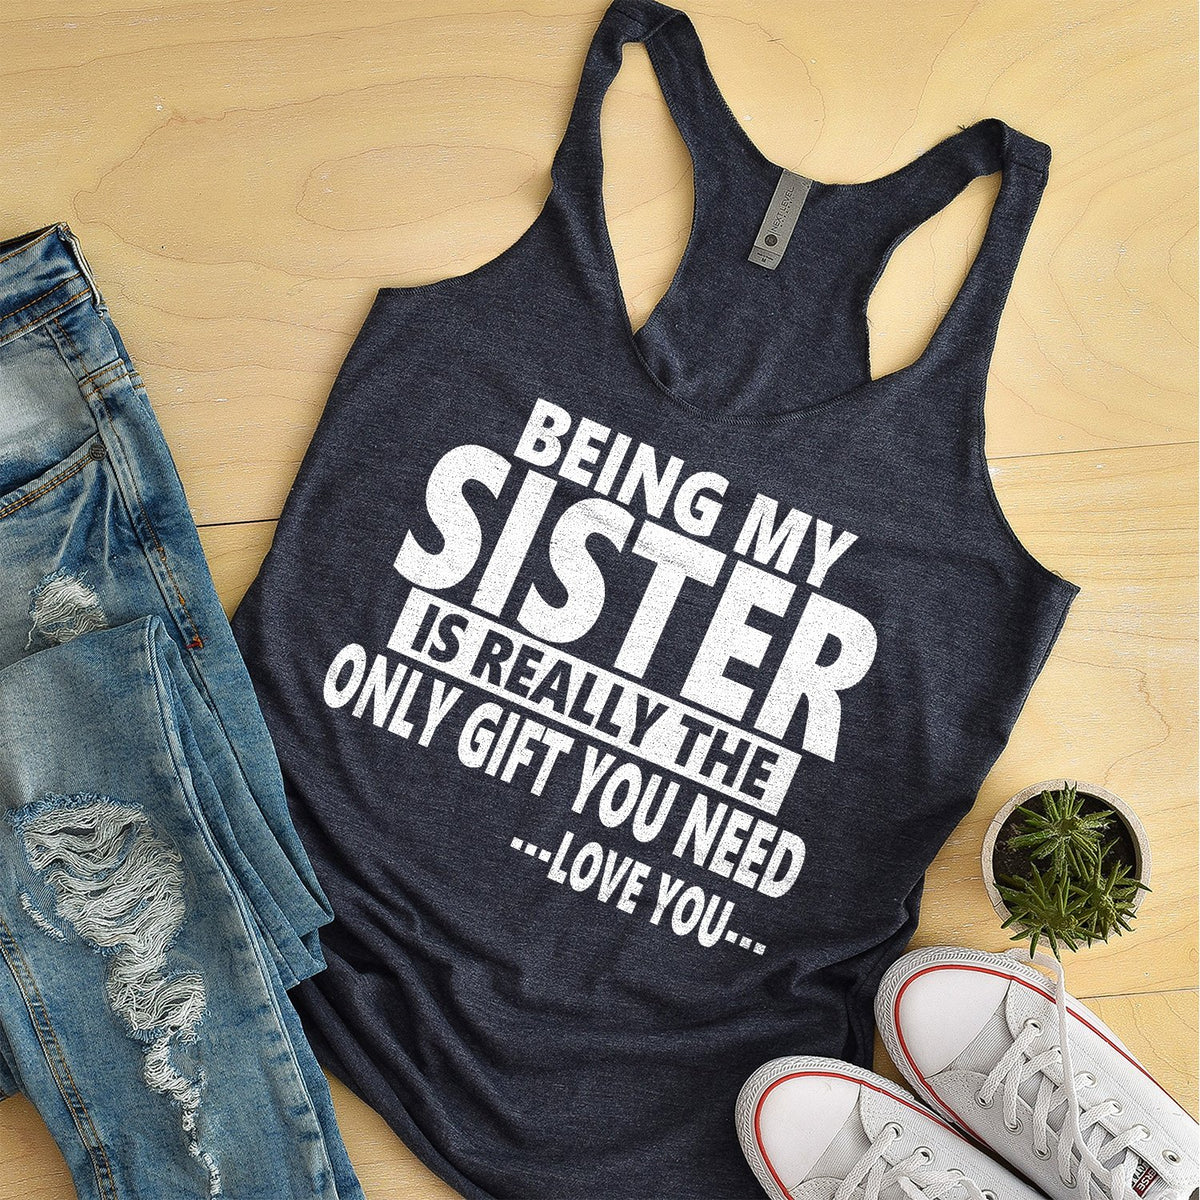 Being My Sister is Really The Only Gift You Need...Love You... - Tank Top Racerback